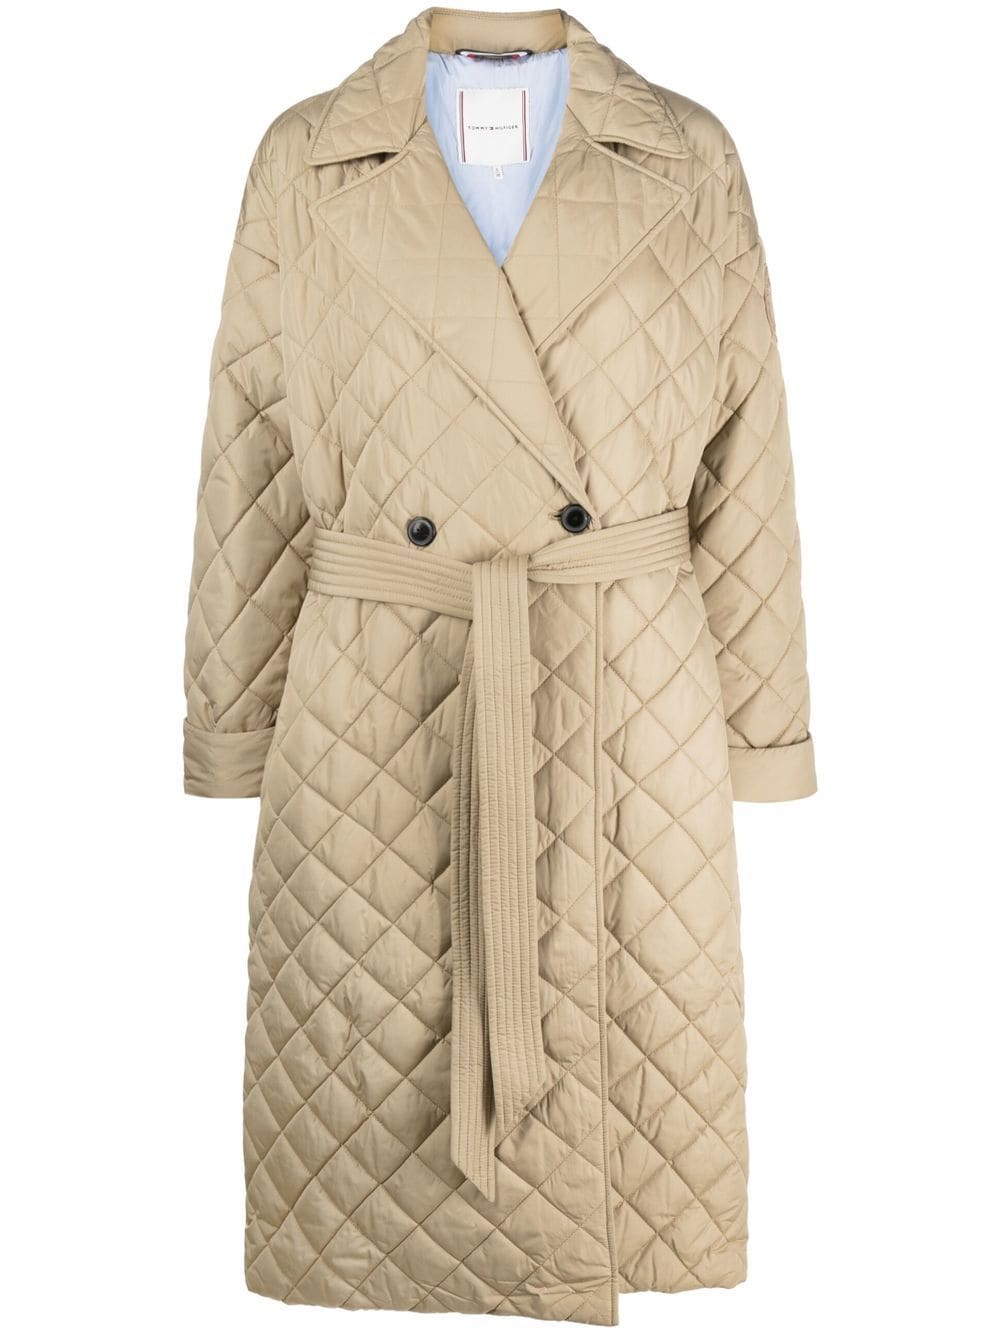 Hilfiger Belted Coat Sorona Tommy - Quilted Farfetch